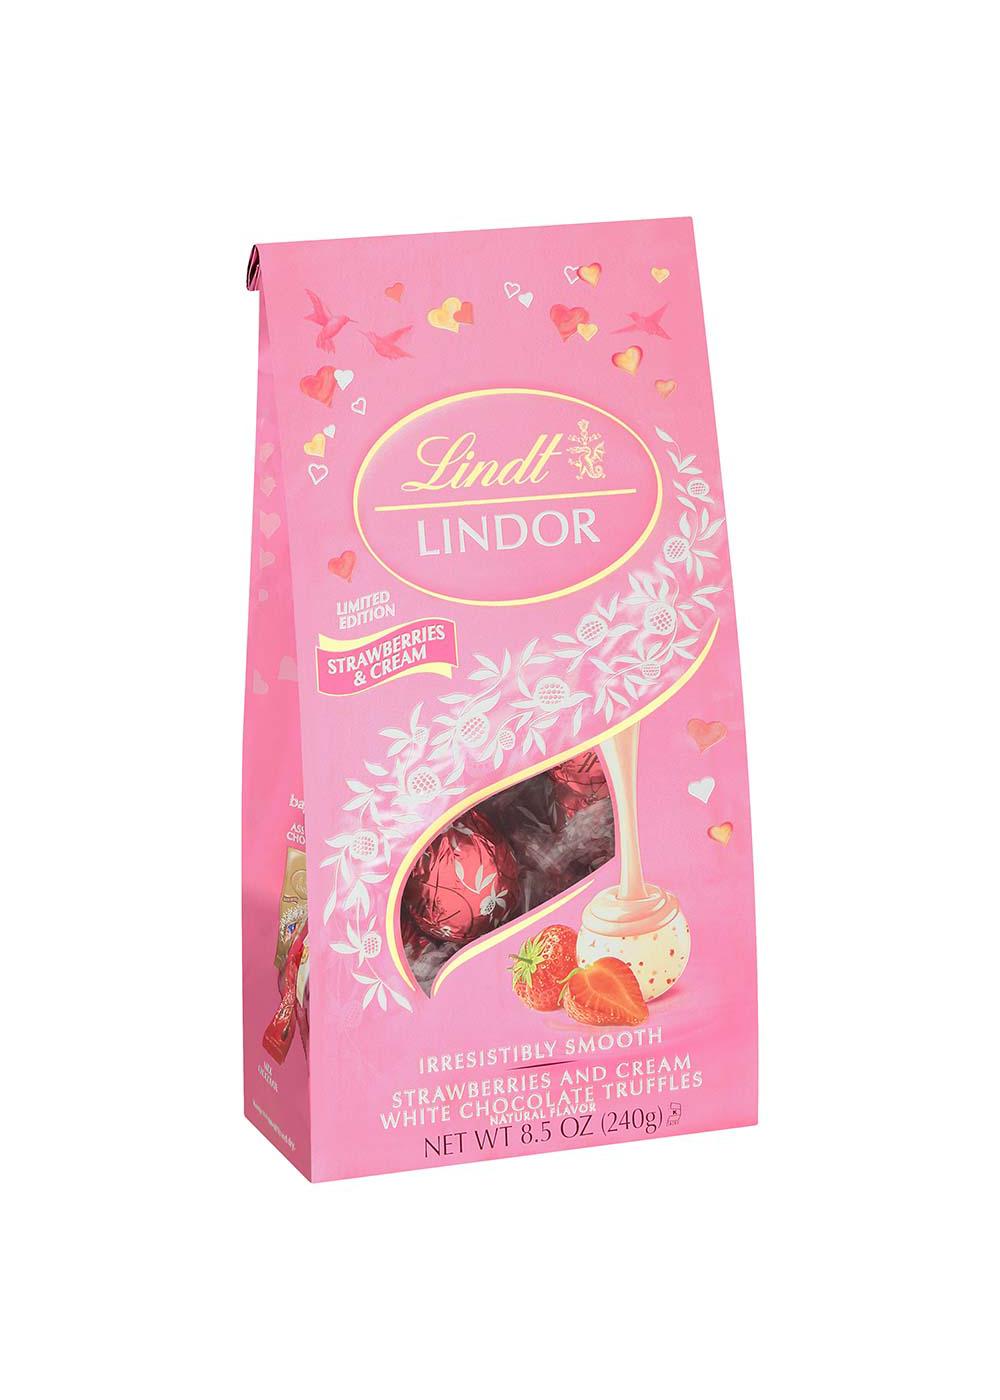 Lindt Lindor Strawberries & Cream White Chocolate Truffles Valentine's Candy; image 3 of 3